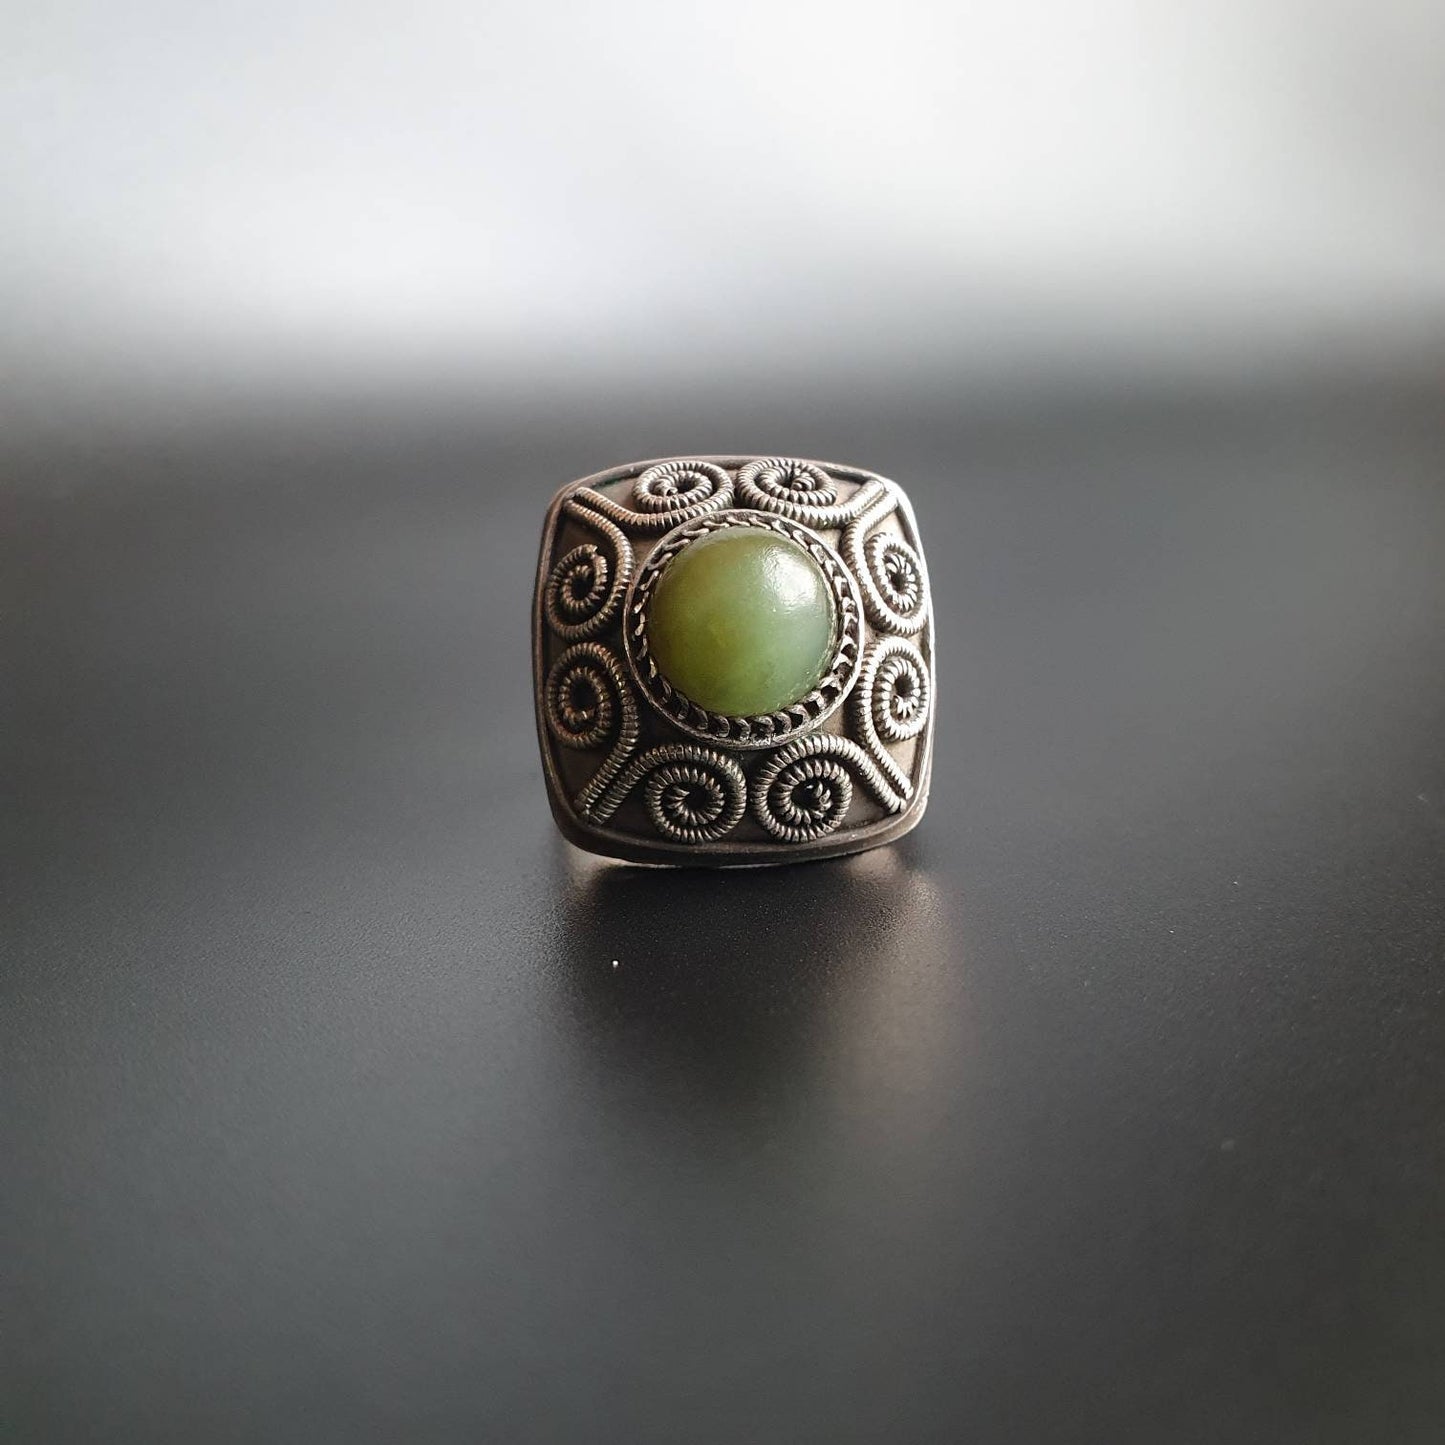 Gothic ring, sterling silver ring, statement ring, chunky ring, historical jewelry, gifts,jade gemstone, healing gemstone, unique jewelry